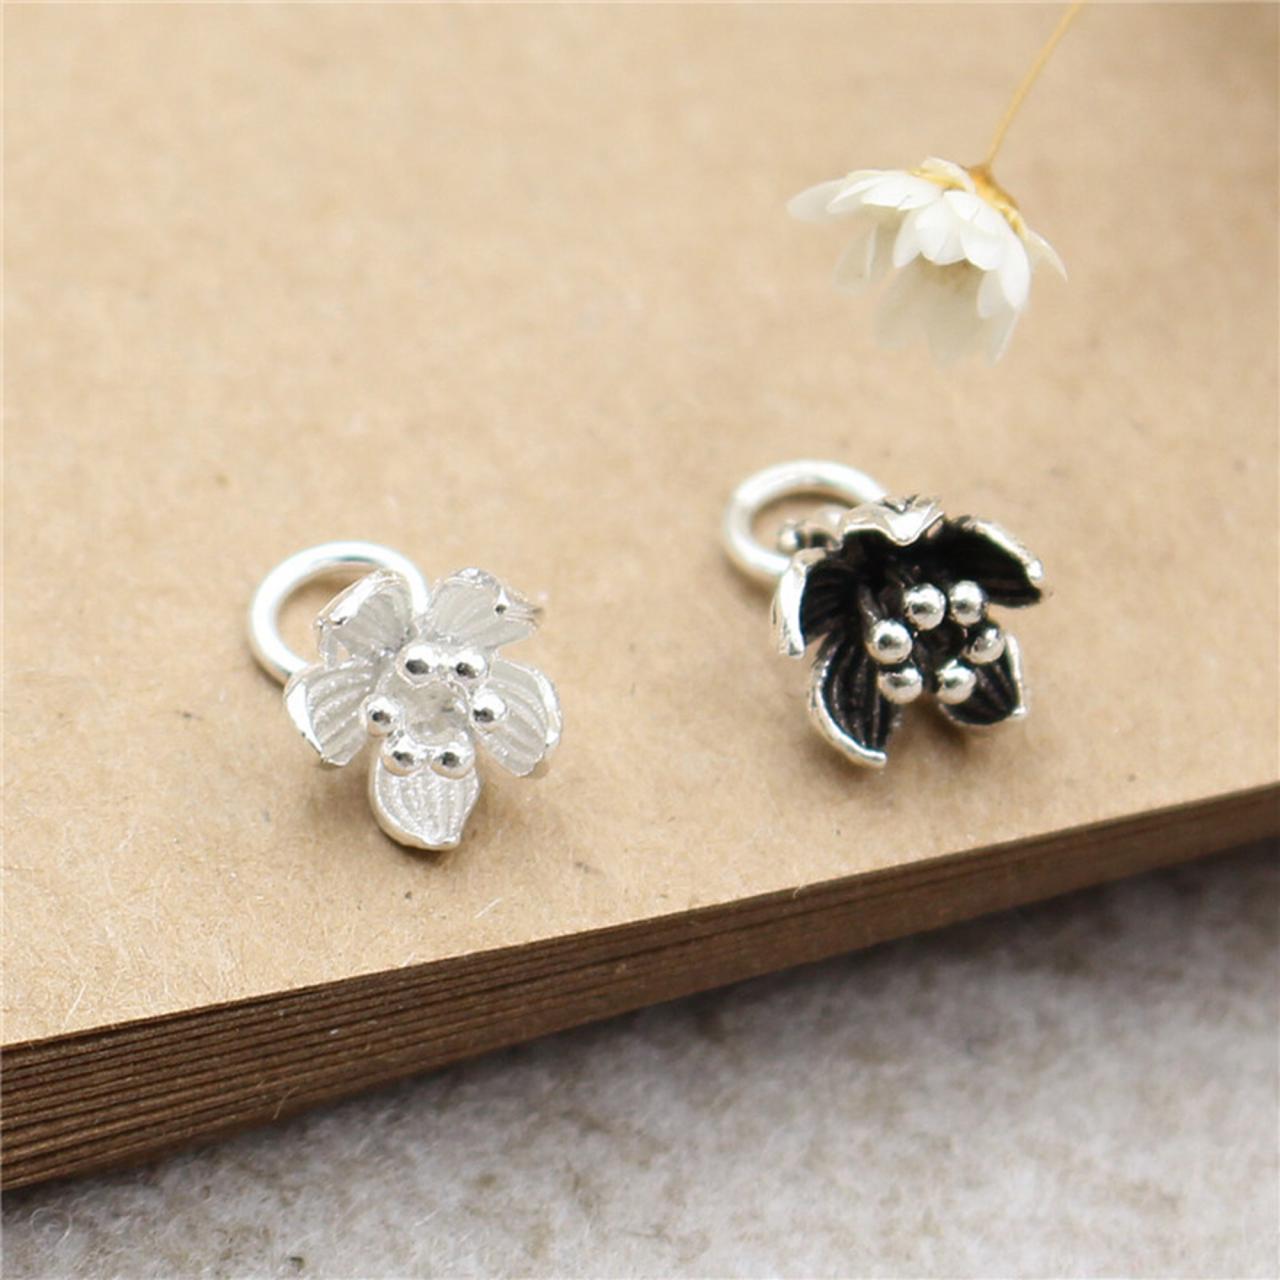 2pcs Sterling Silver Flower Charms, 925 Silver Flower Charm, Necklace Charm, Bracelet Charm, Earring Charms, Tiny Charms, Flower Charms Pendant